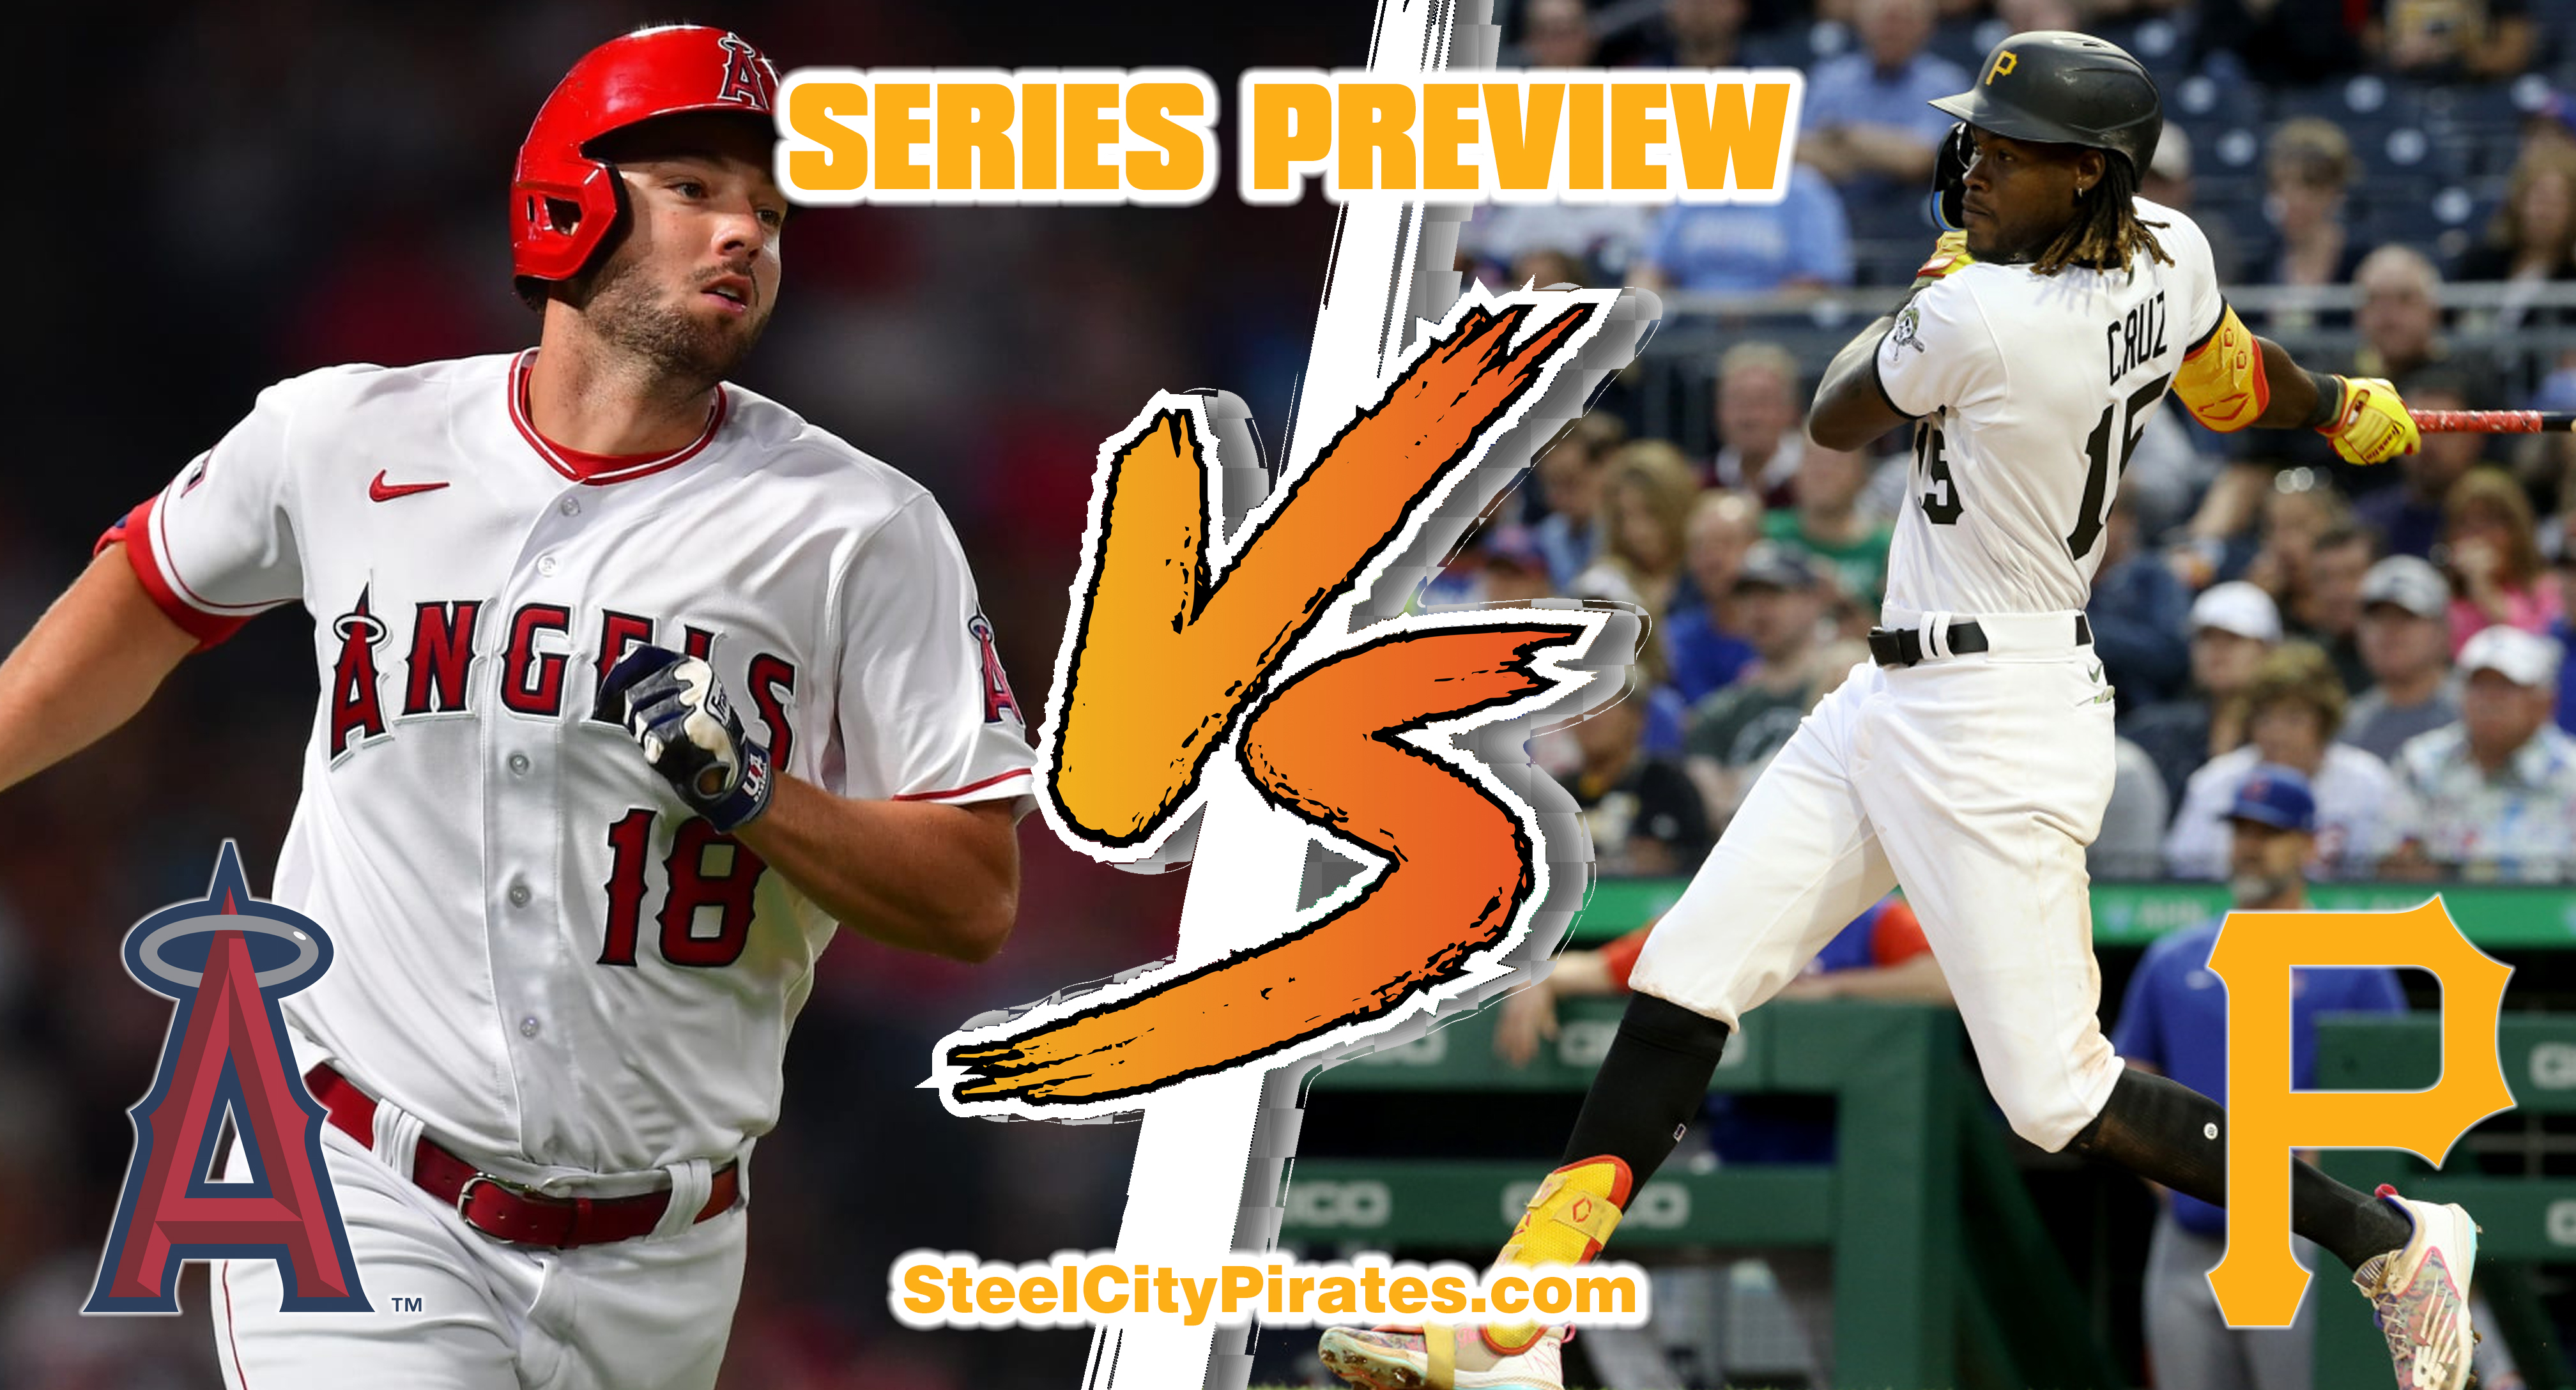 Series Preview: Angels (12-22) at Pirates (16-19)